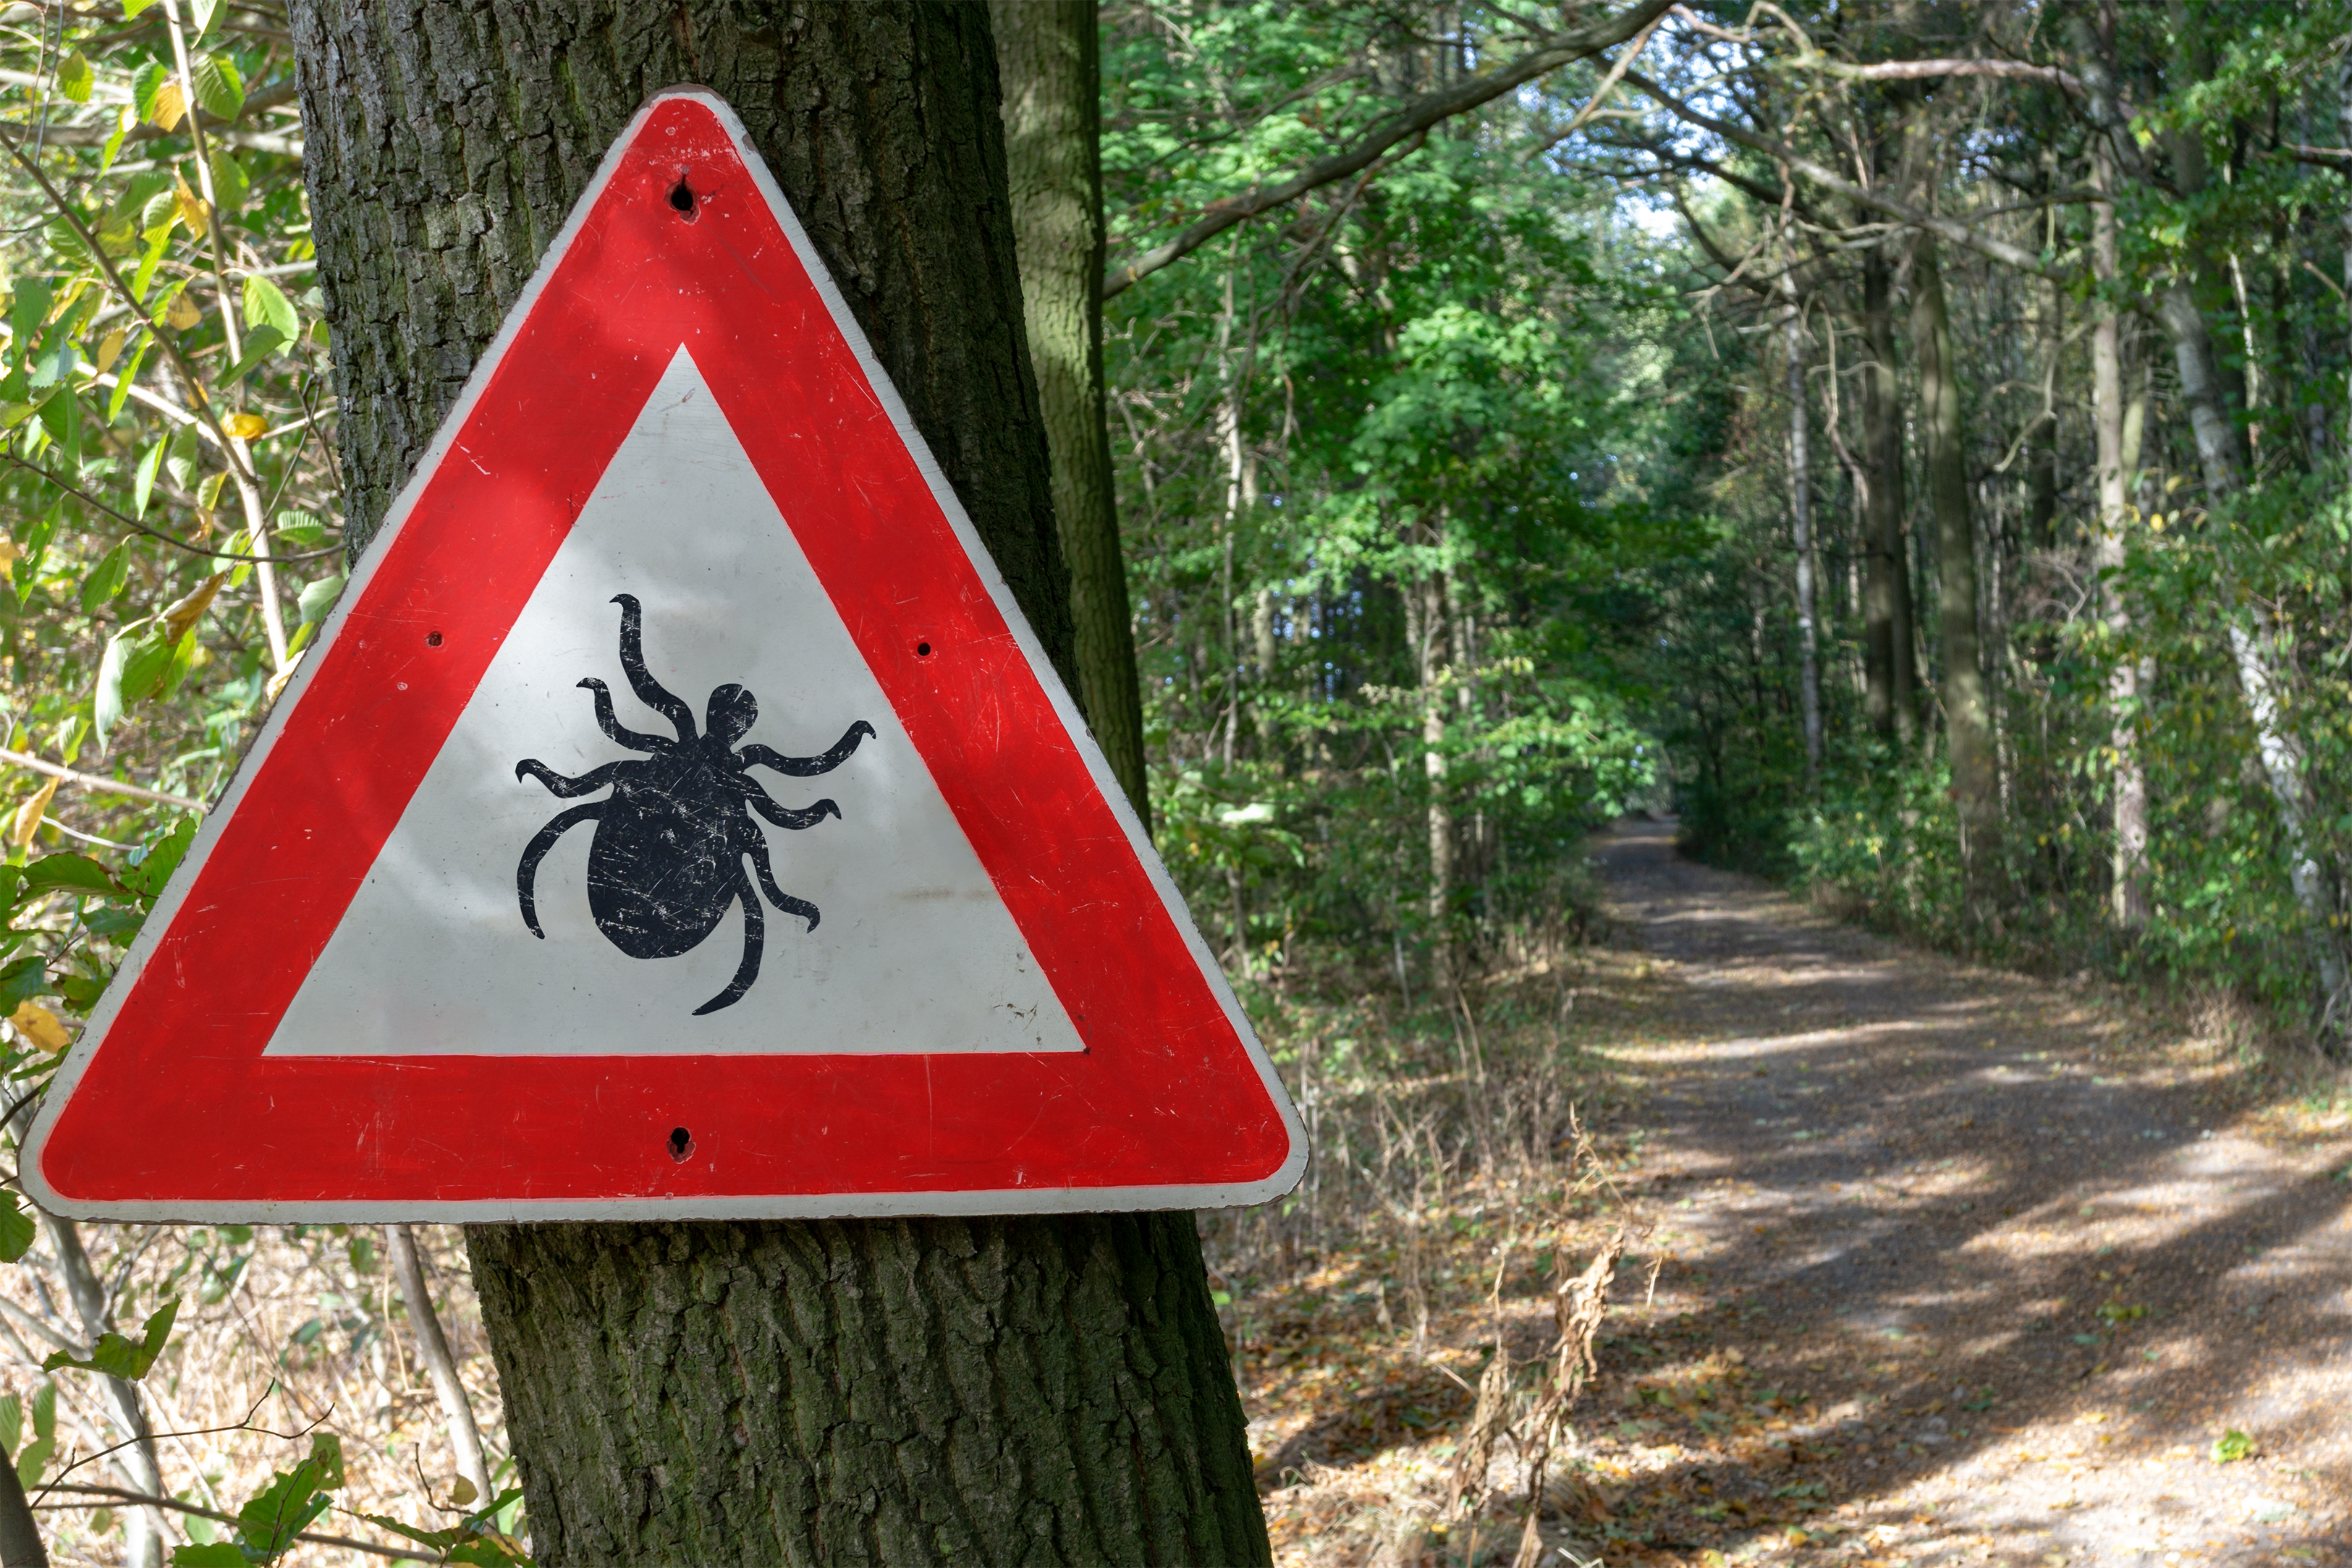 tick insect warning sign in forest